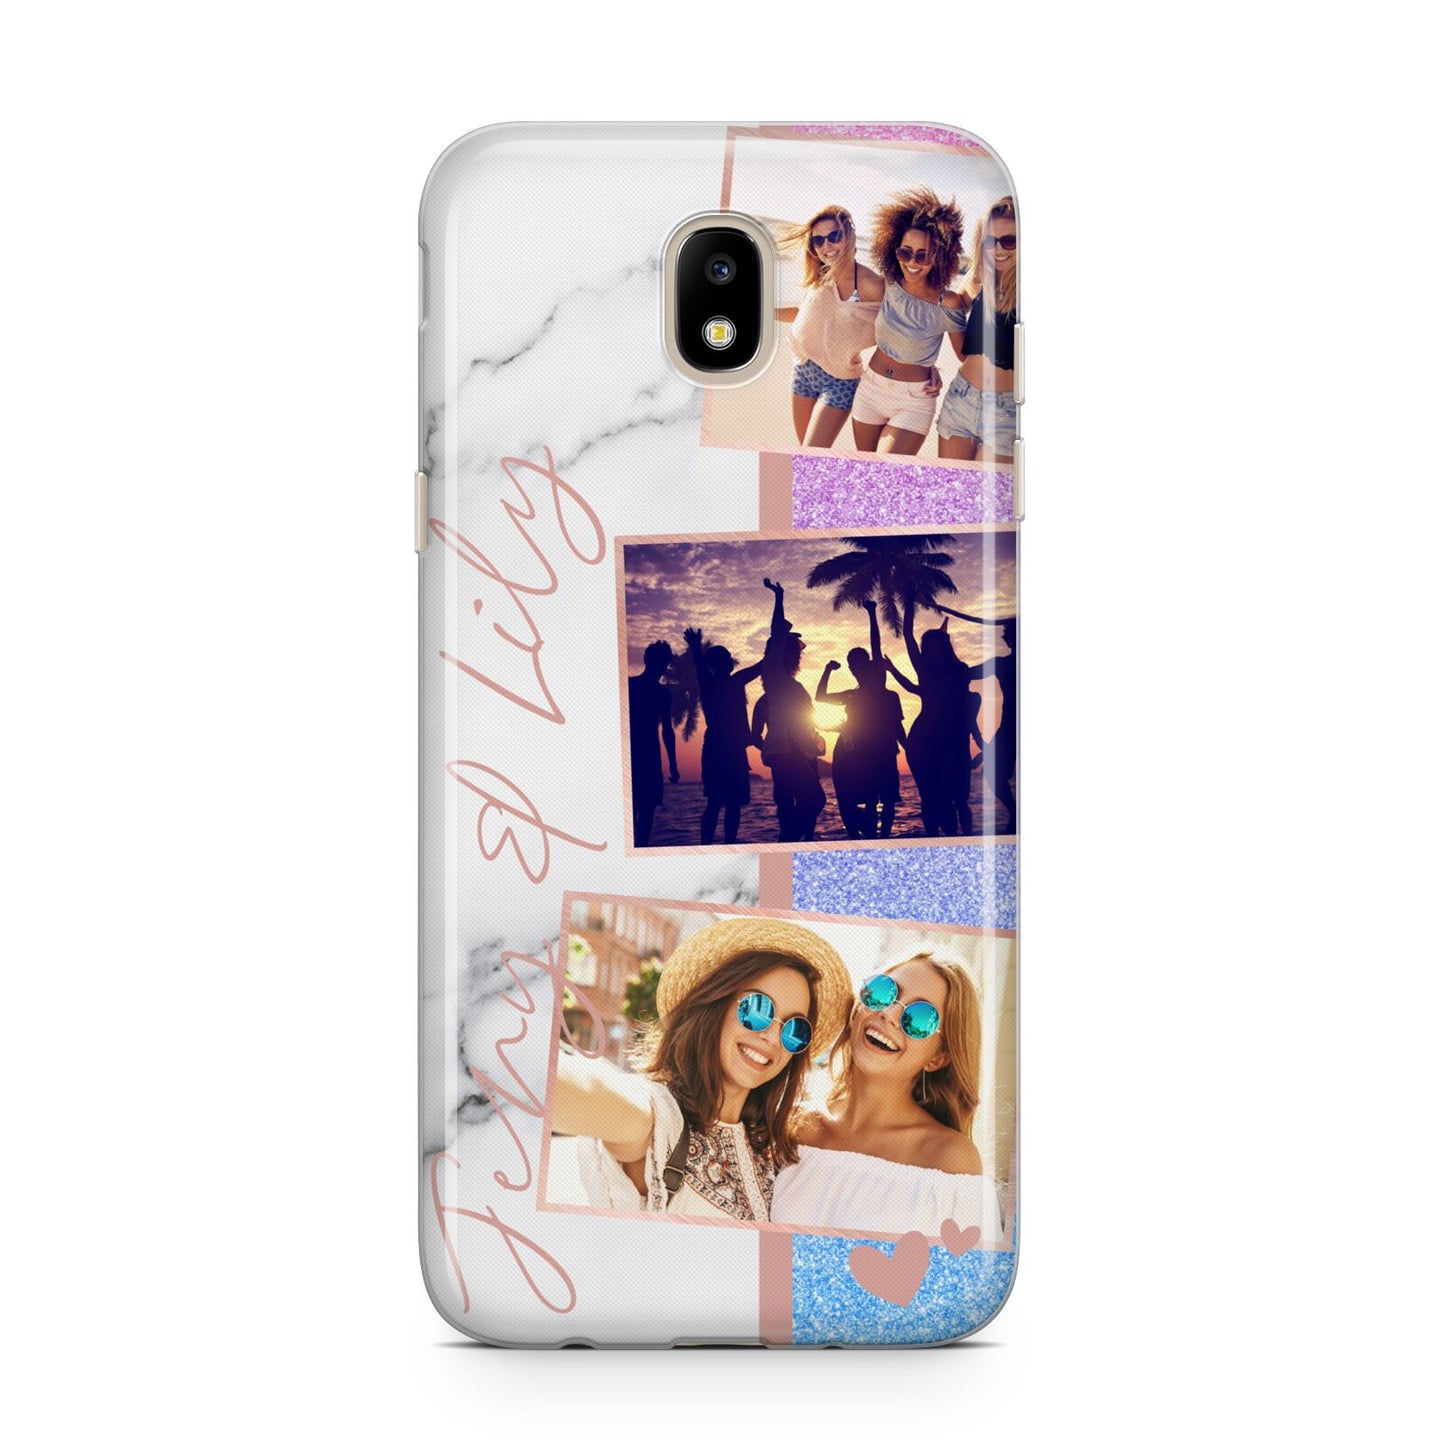 Glitter and Marble Photo Upload with Text Samsung J5 2017 Case